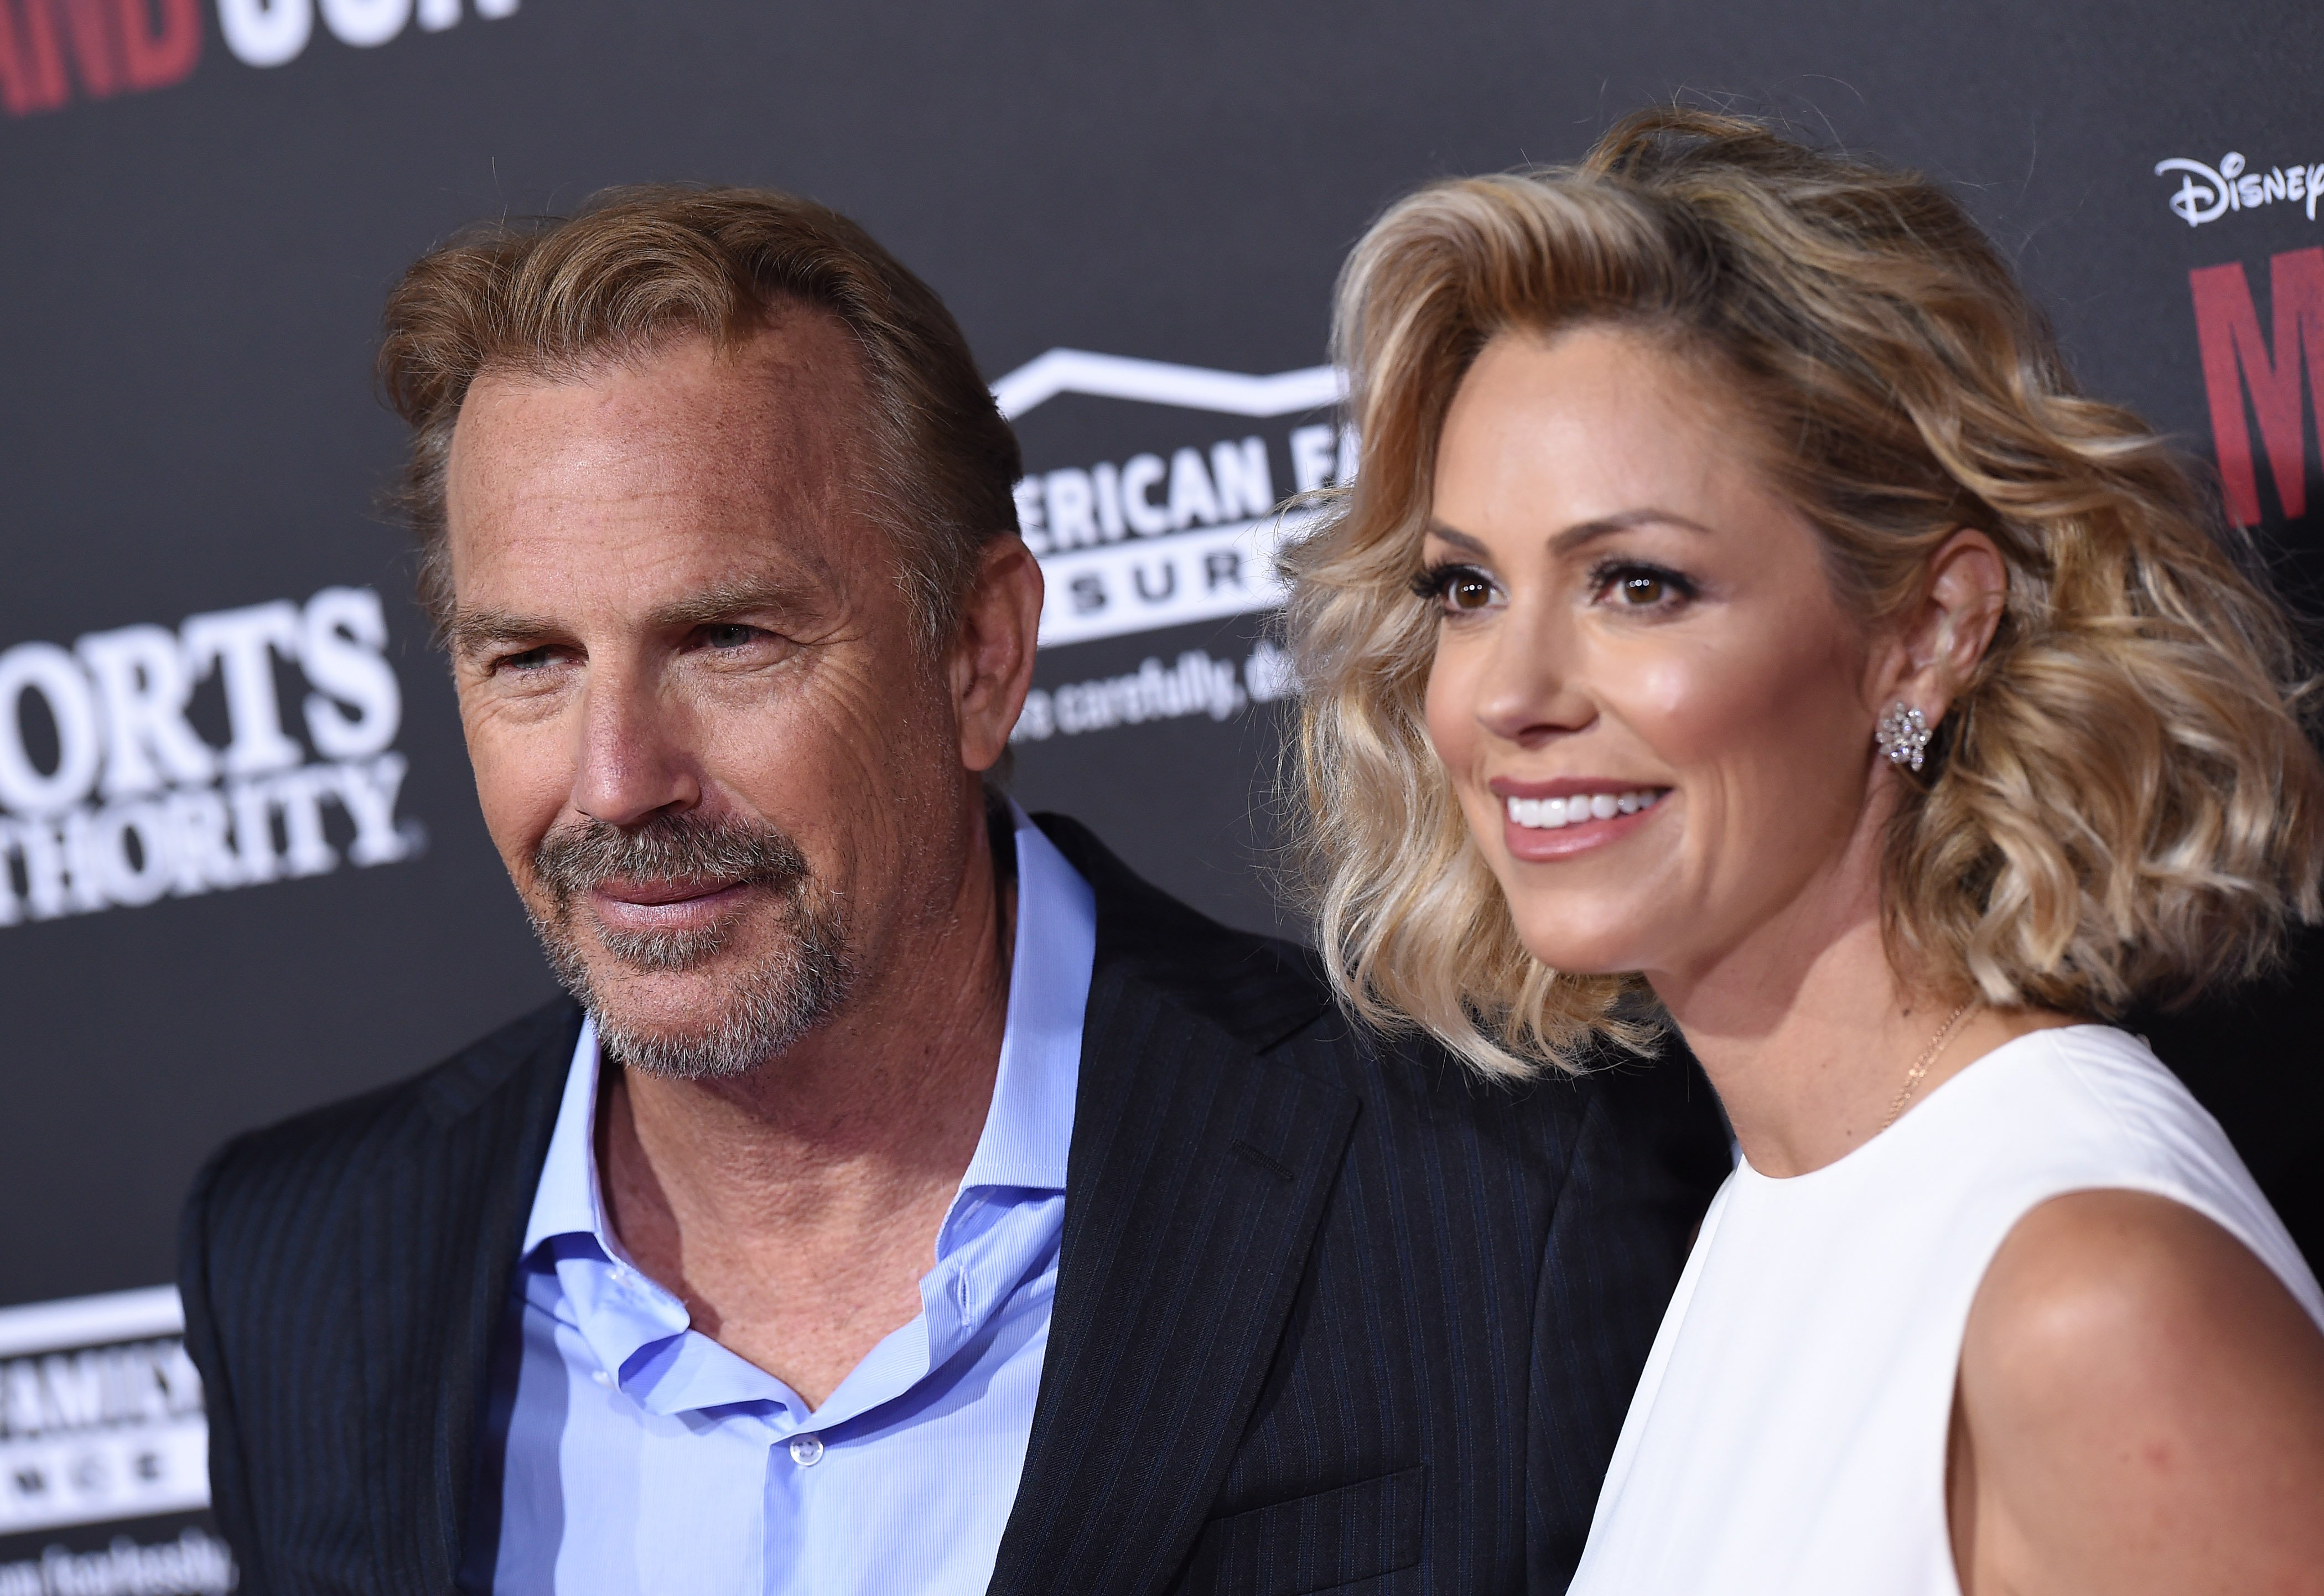 Kevin Costner and wife Christine Baumgartner arrive at the World Premiere of Disney's 'McFarland, USA' at the El Capitan Theatre on February 9, 2015, in Hollywood, California. | Source: Getty Images